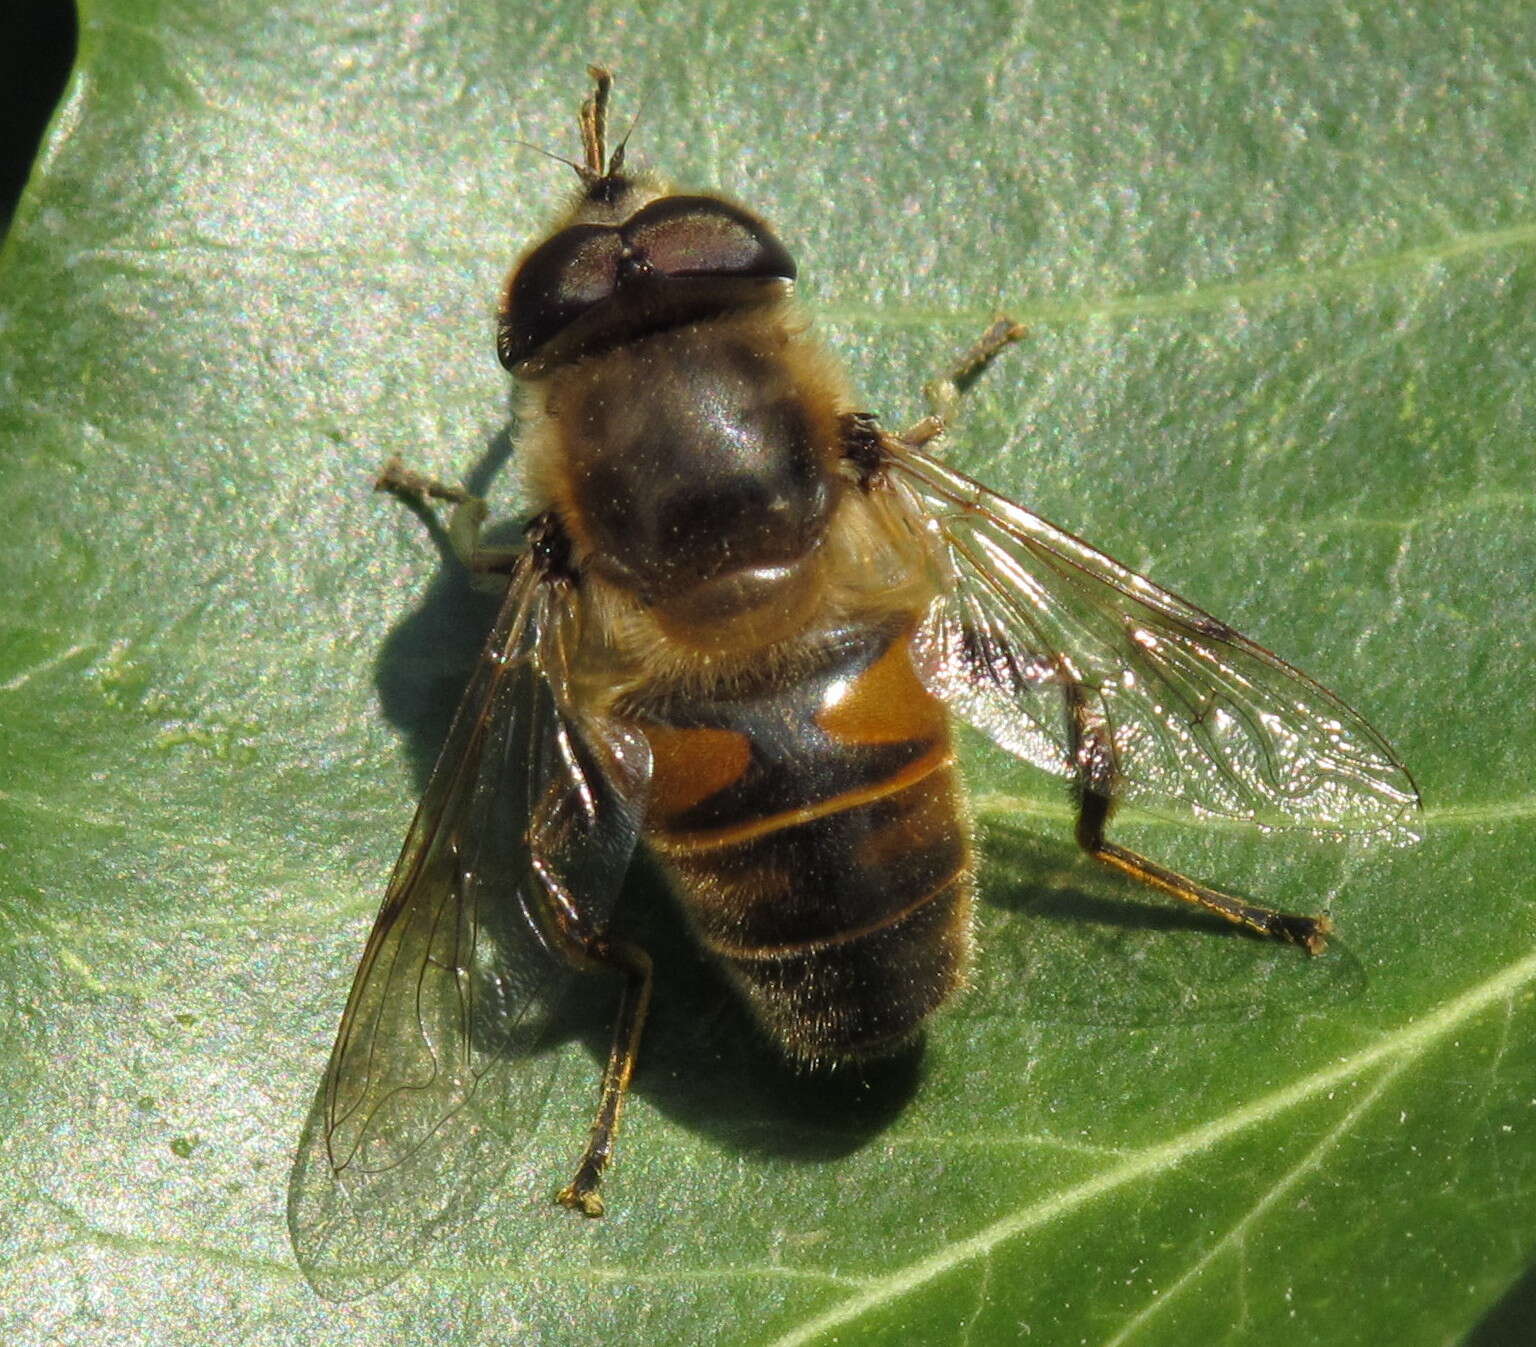 Image of drone fly